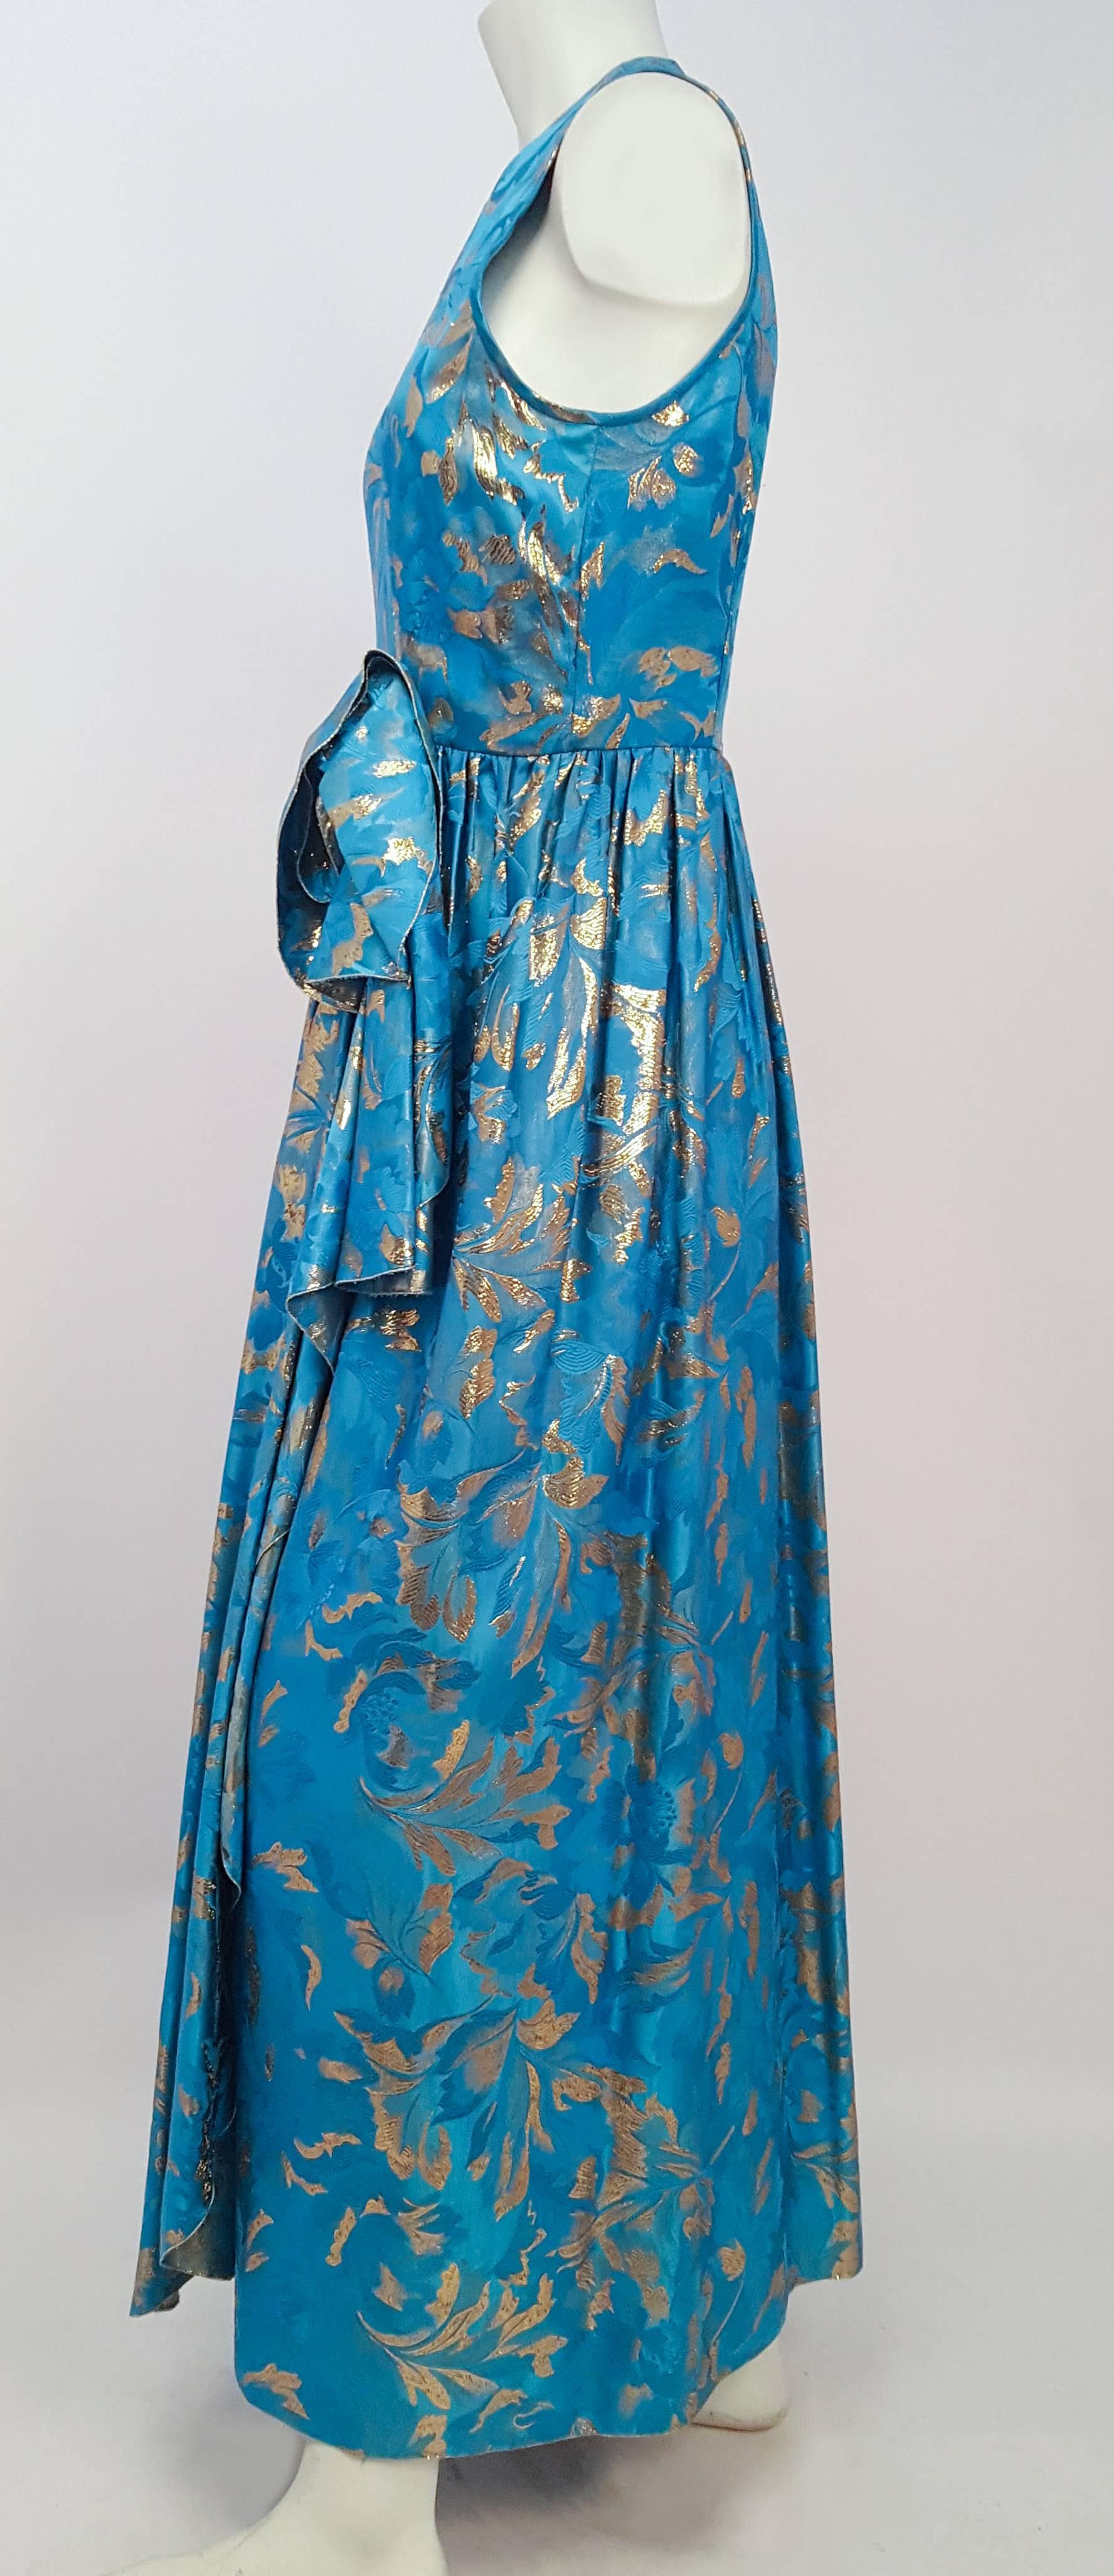 60s Richilene Blue Gown w/ Gold Lamé Threads. Metal back zip closure. Fully lined.